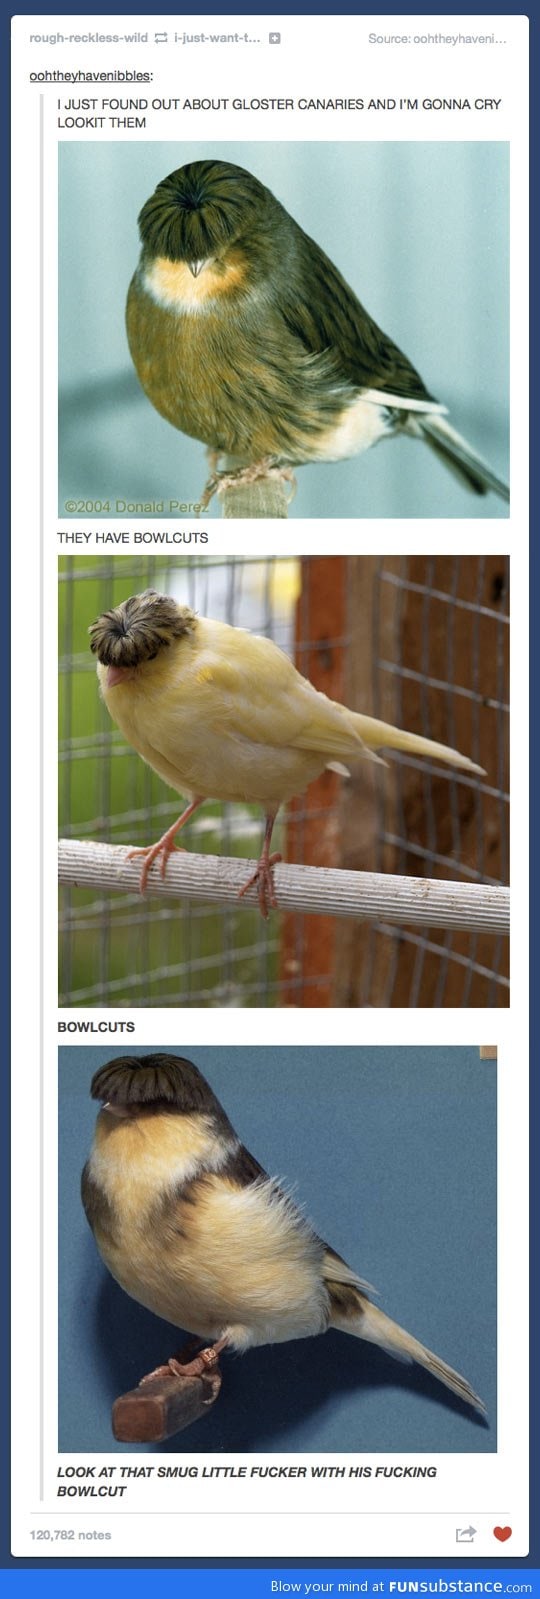 These birds have bowlcuts